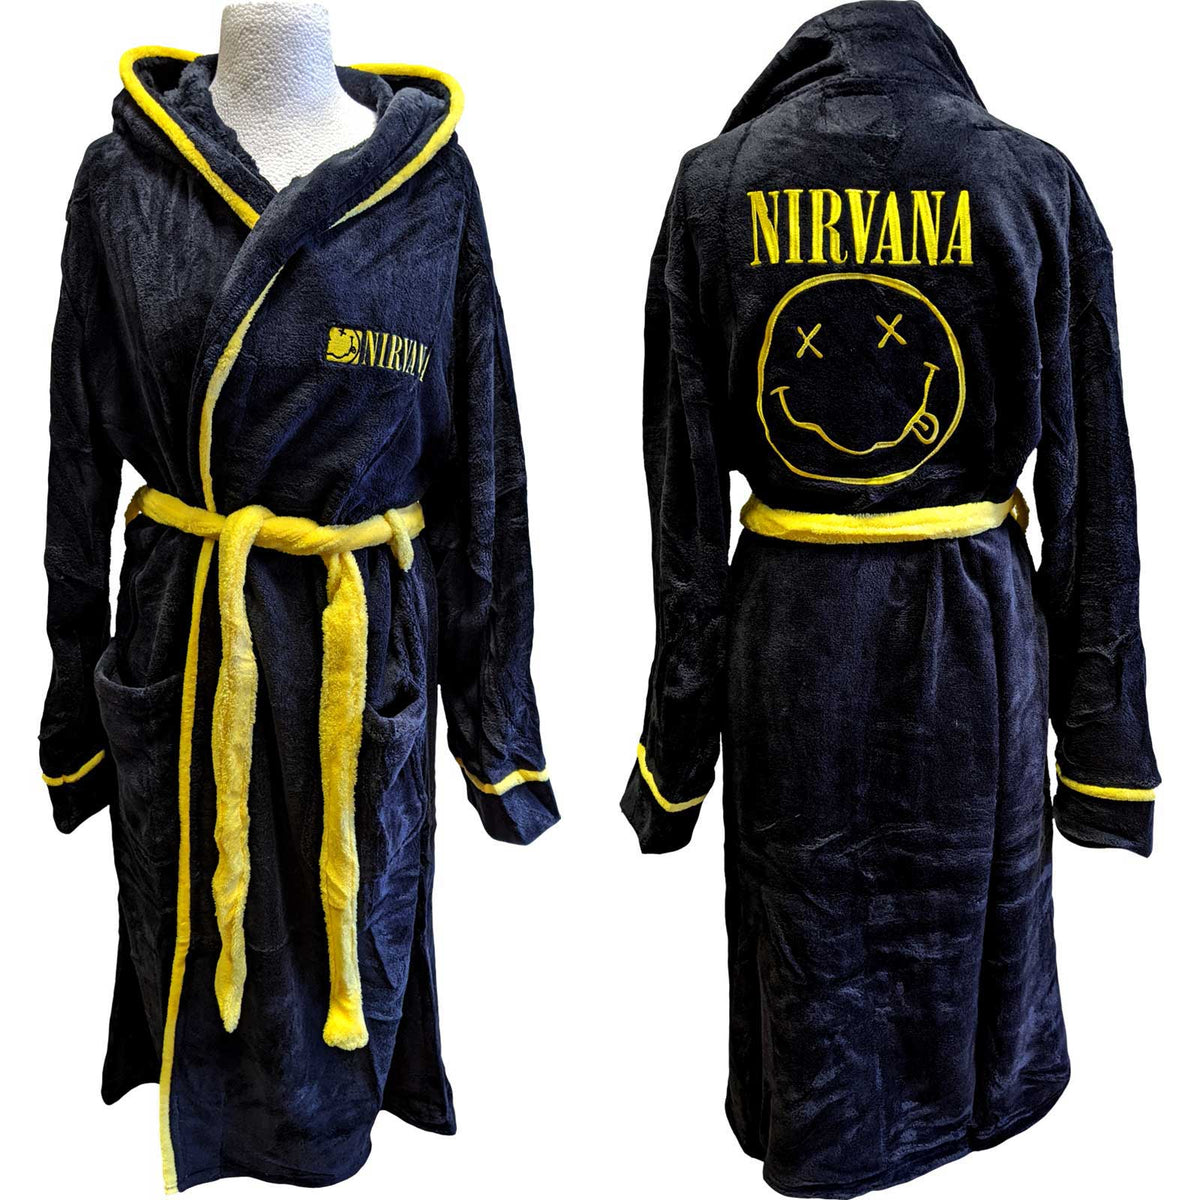 Nirvana Bathrobe - Yellow Happy Face - Official Licensed Music Design